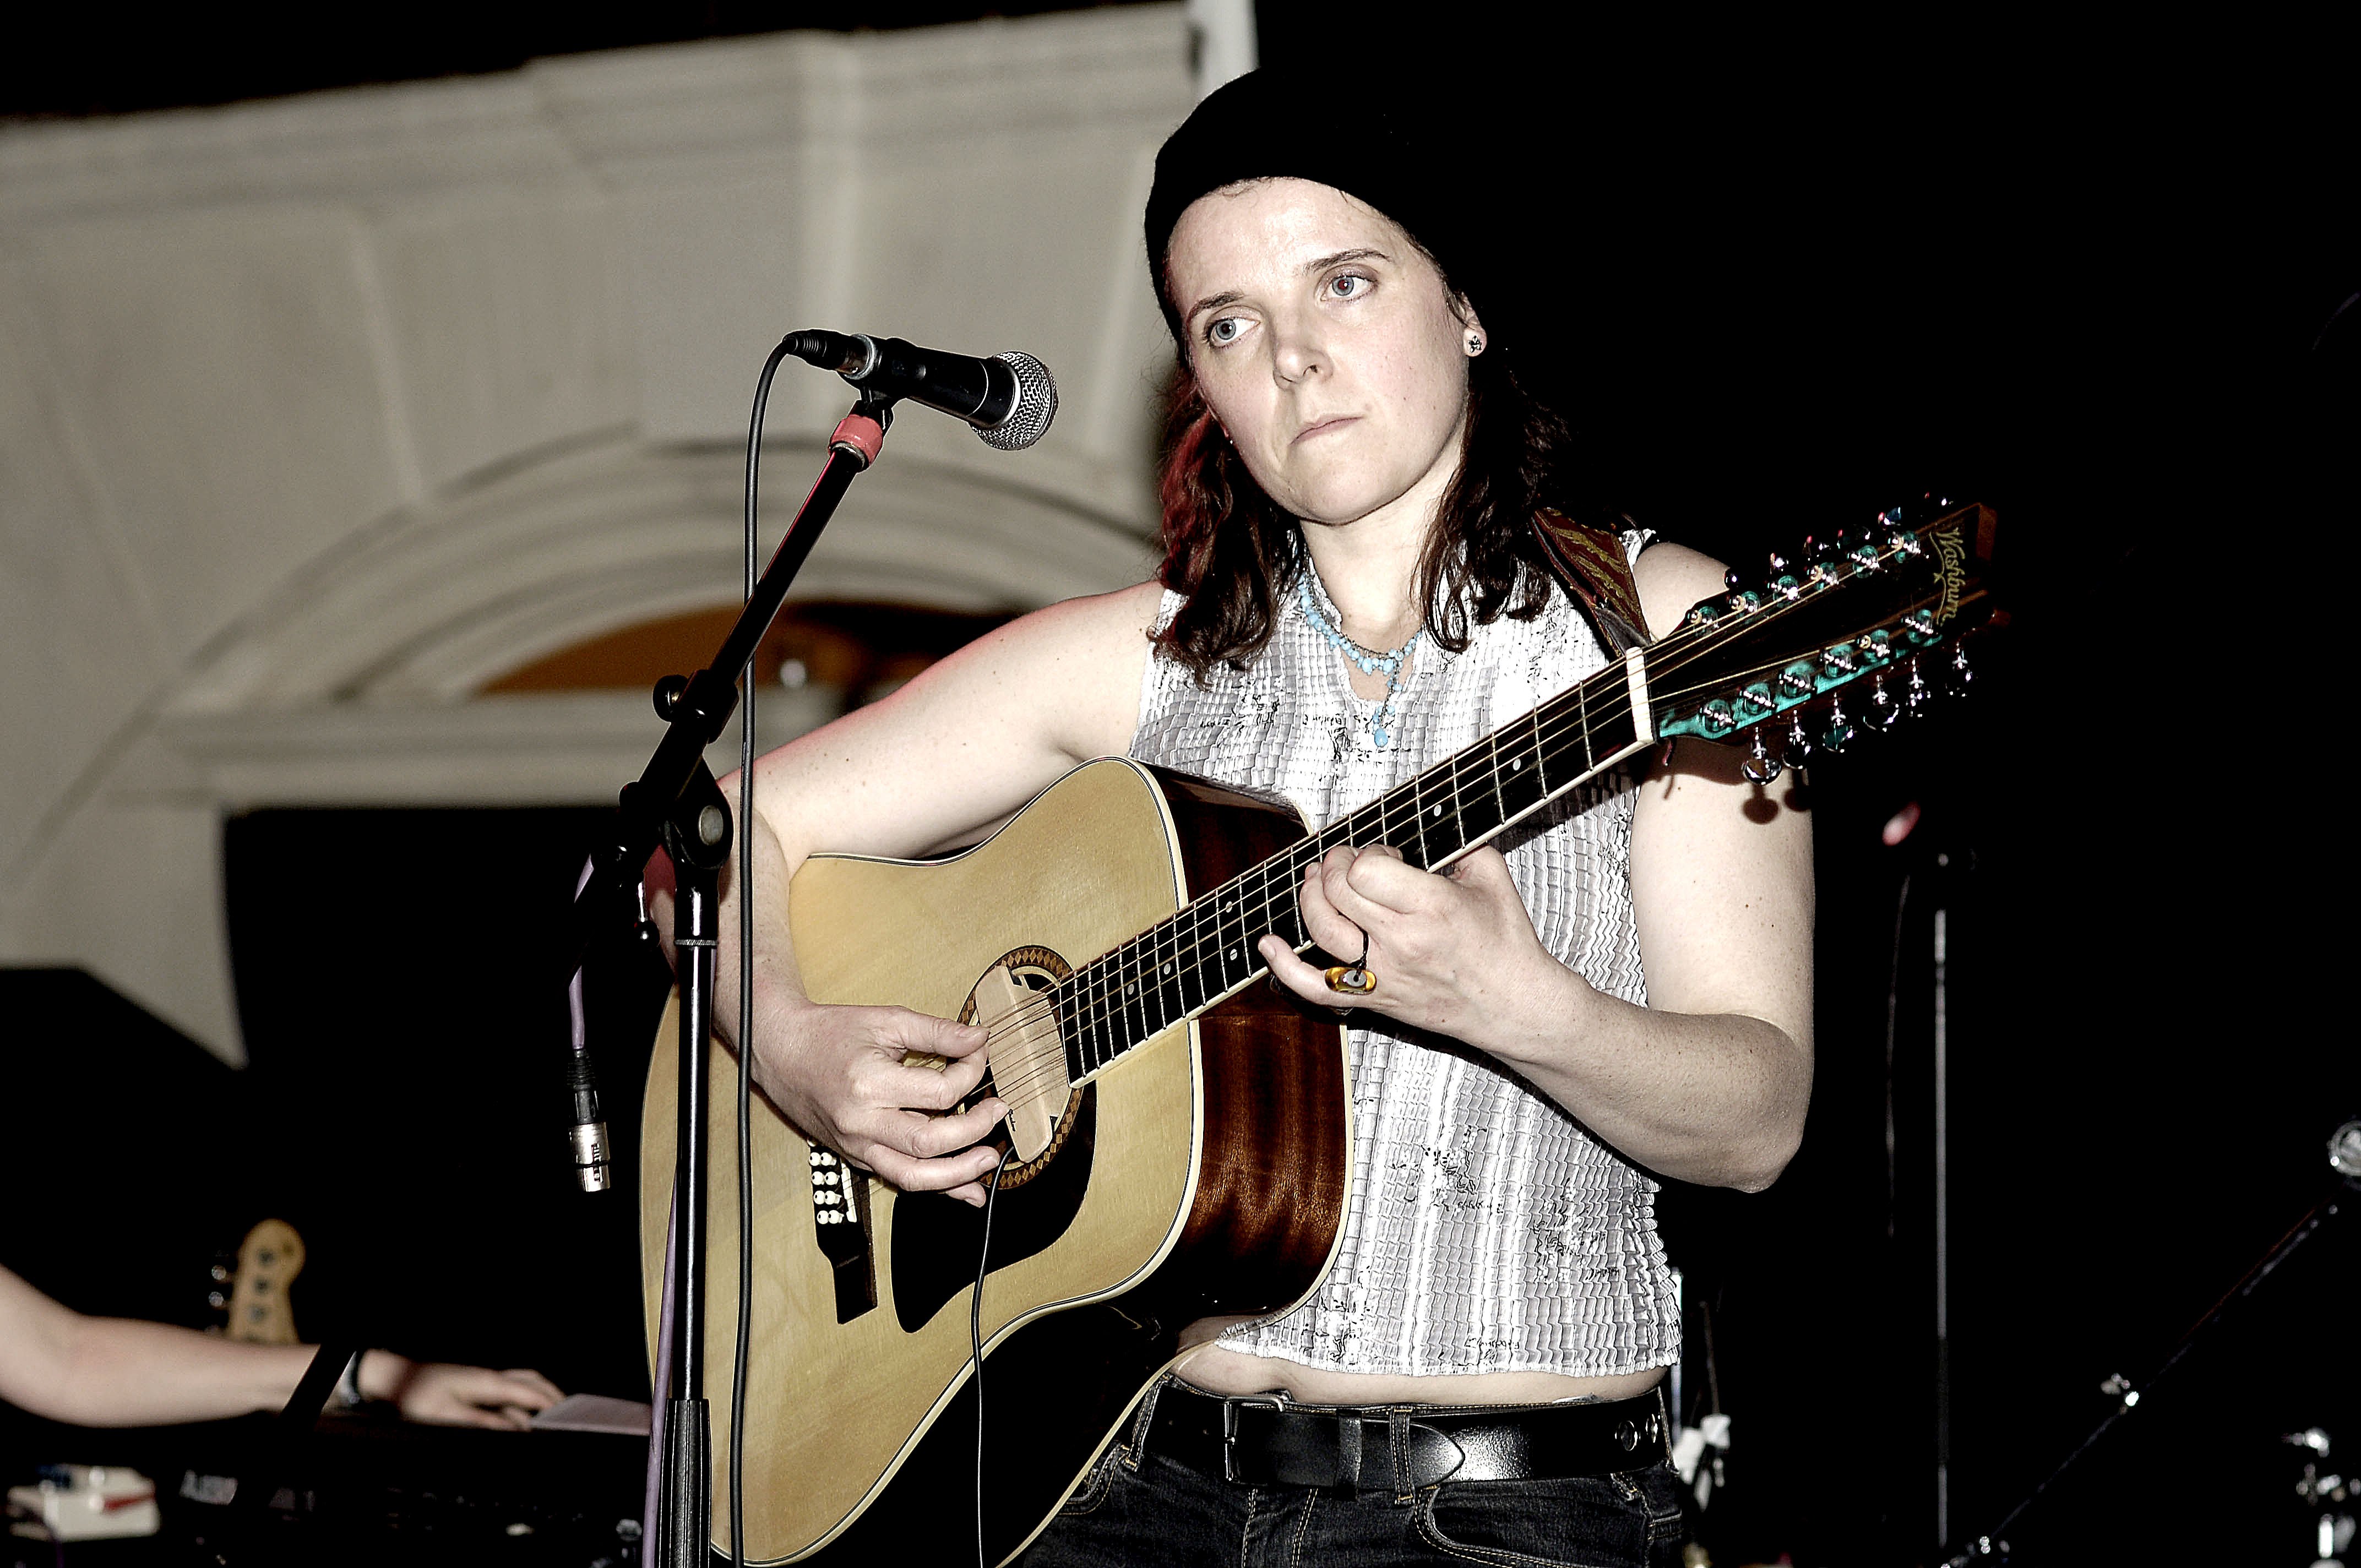 Guitarist Abigail Hopkins performing live on stage at The Spitz on April 25, 2006 in London.┃Source: Getty Images